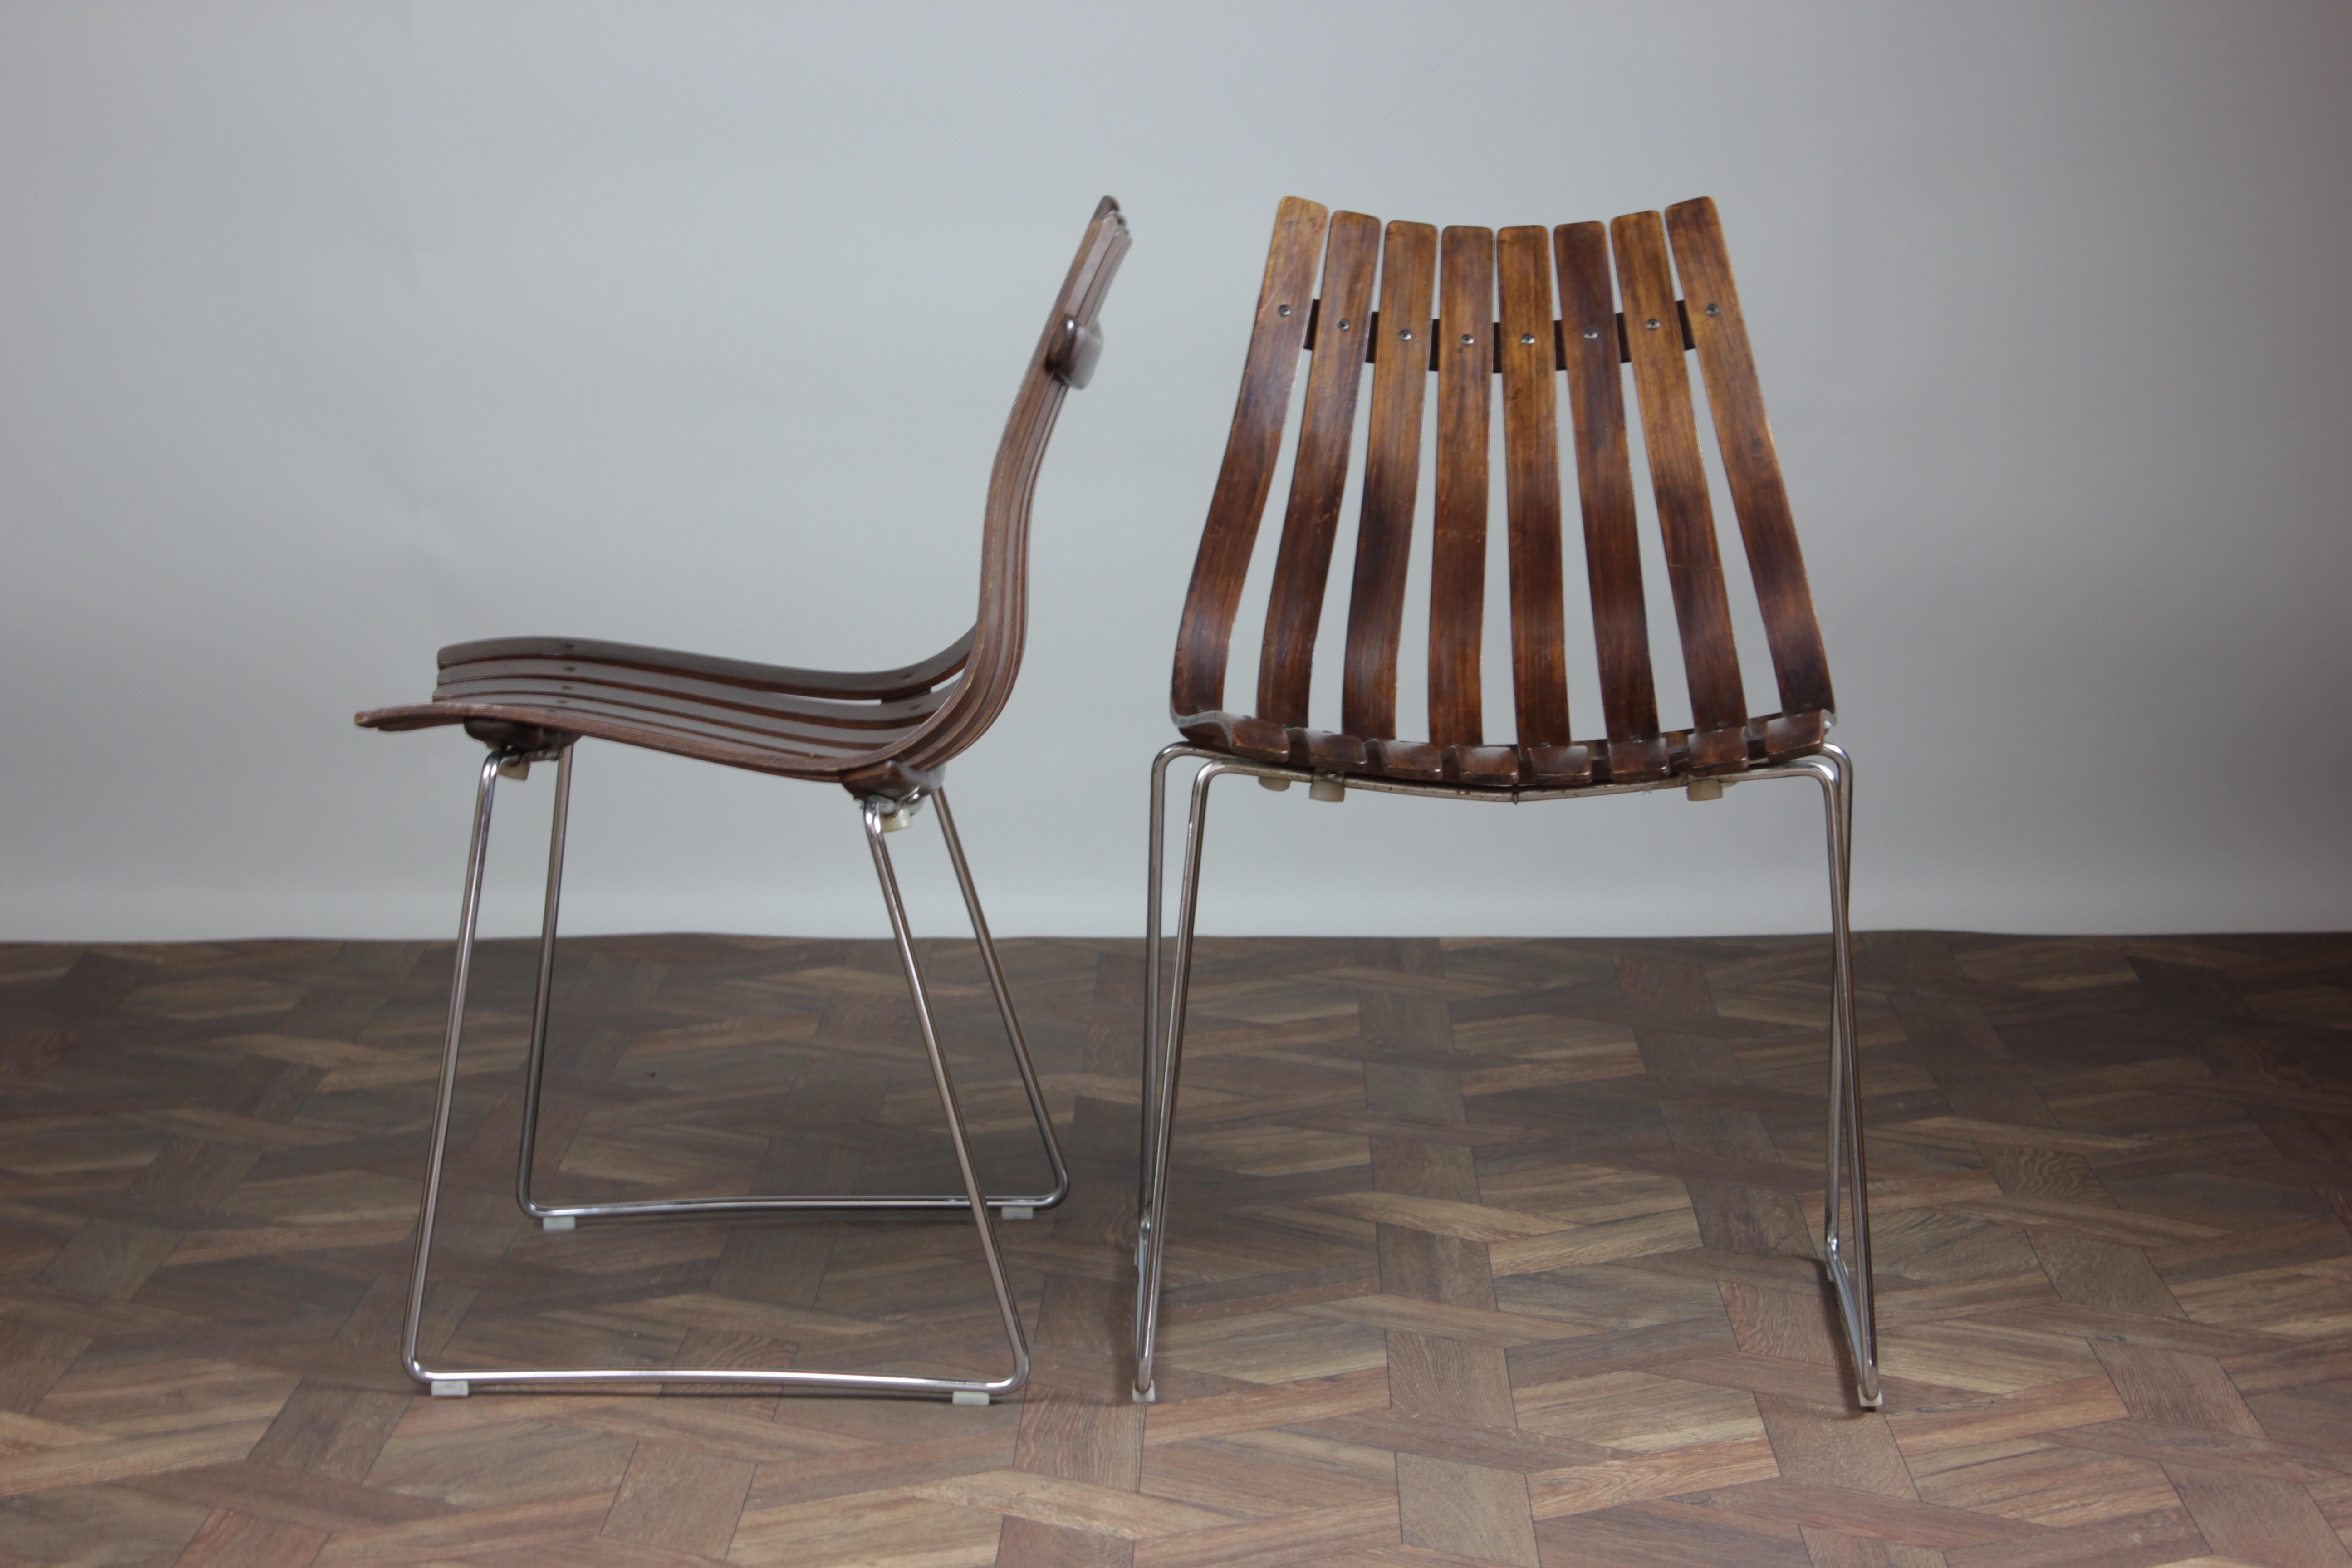 Rosewood Set of Six Mid Century Modern Dining Chairs by Hans Brattrud for Hove Møbler